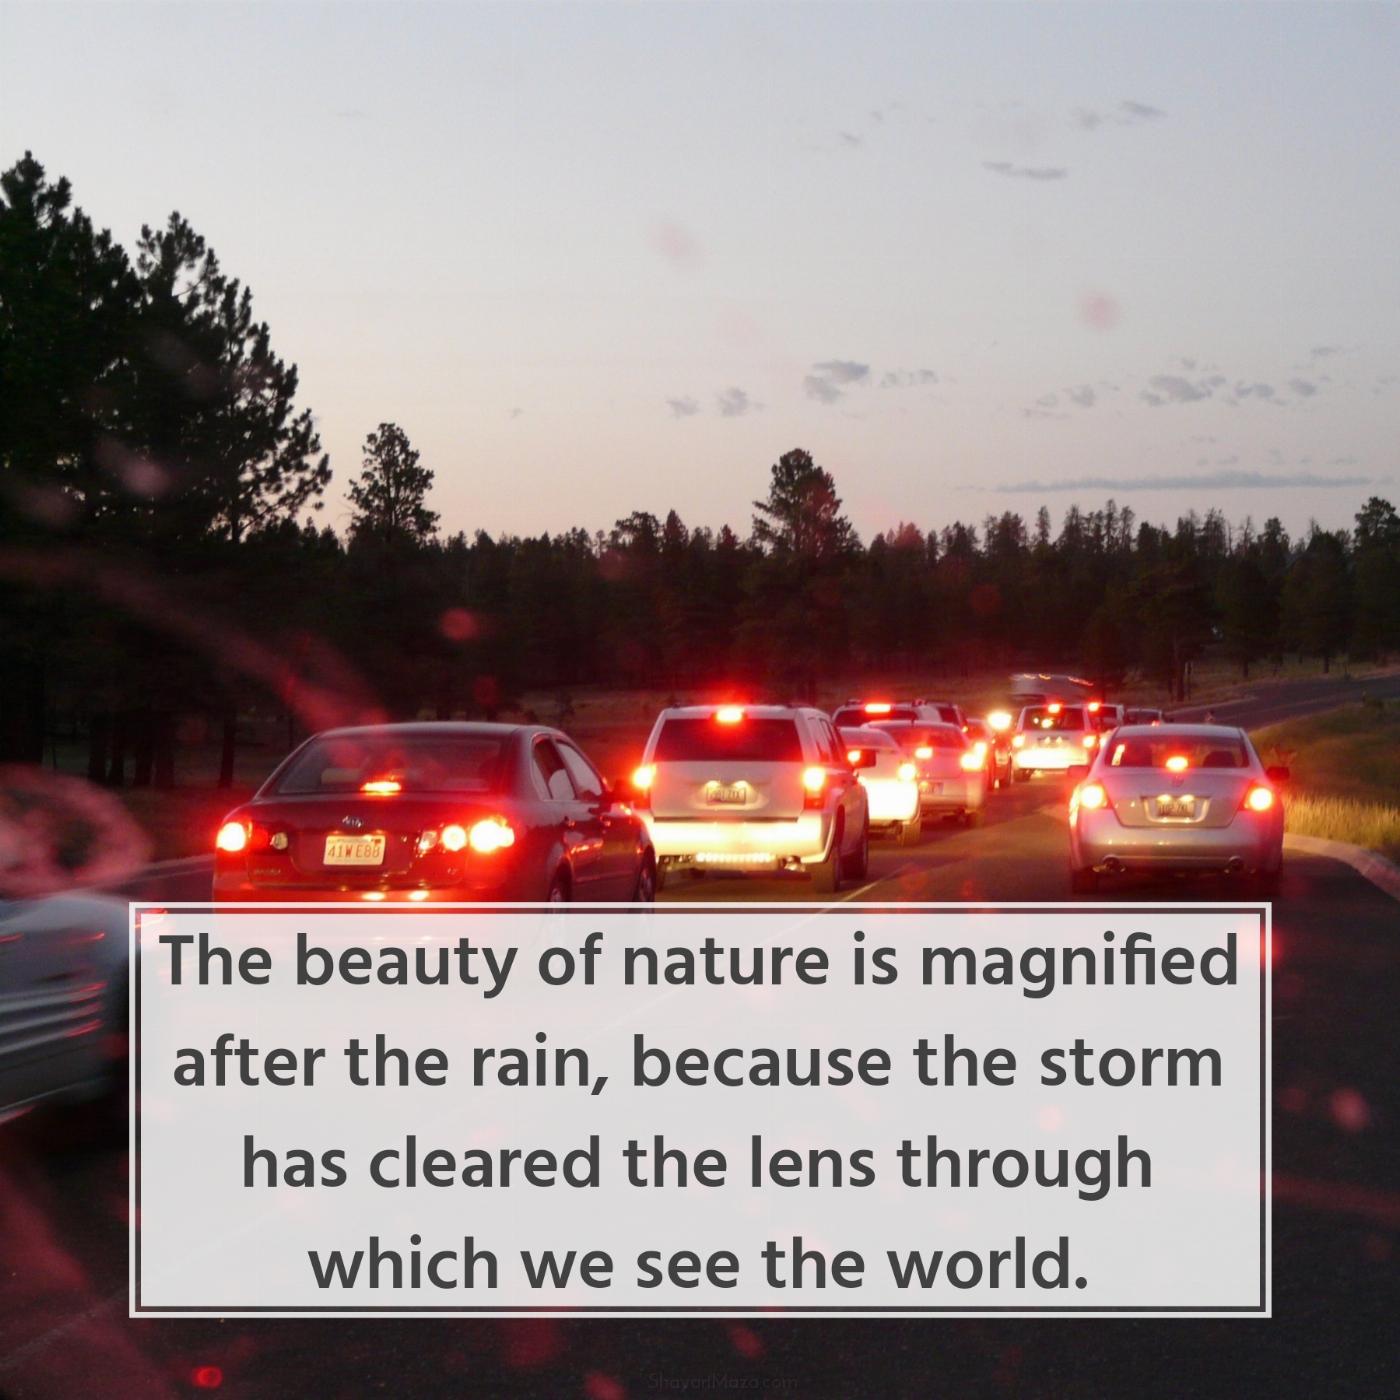 The beauty of nature is magnified after the rain because the storm has cleared the lens